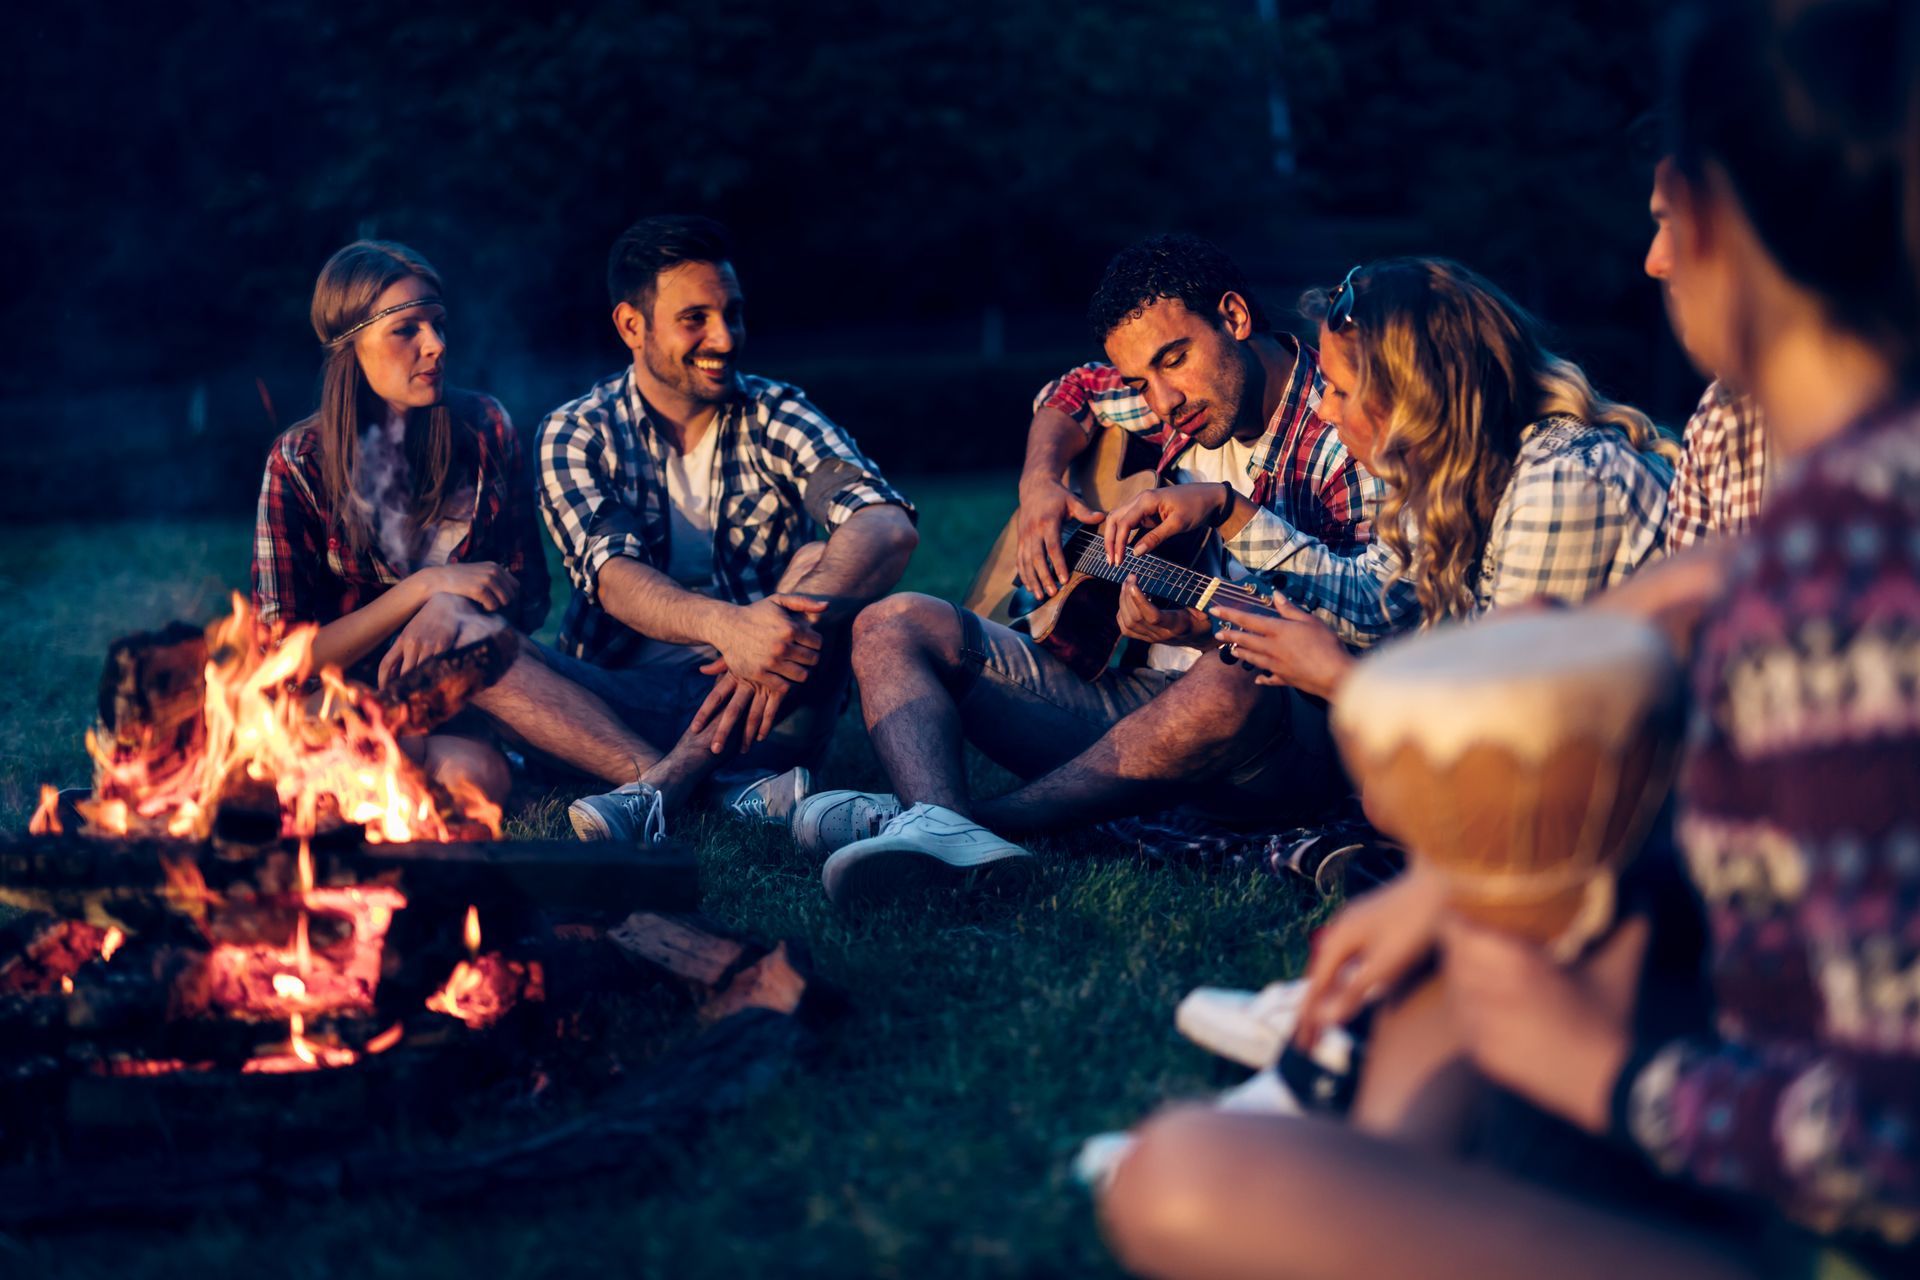 A group of people are sitting around a campfire at night.